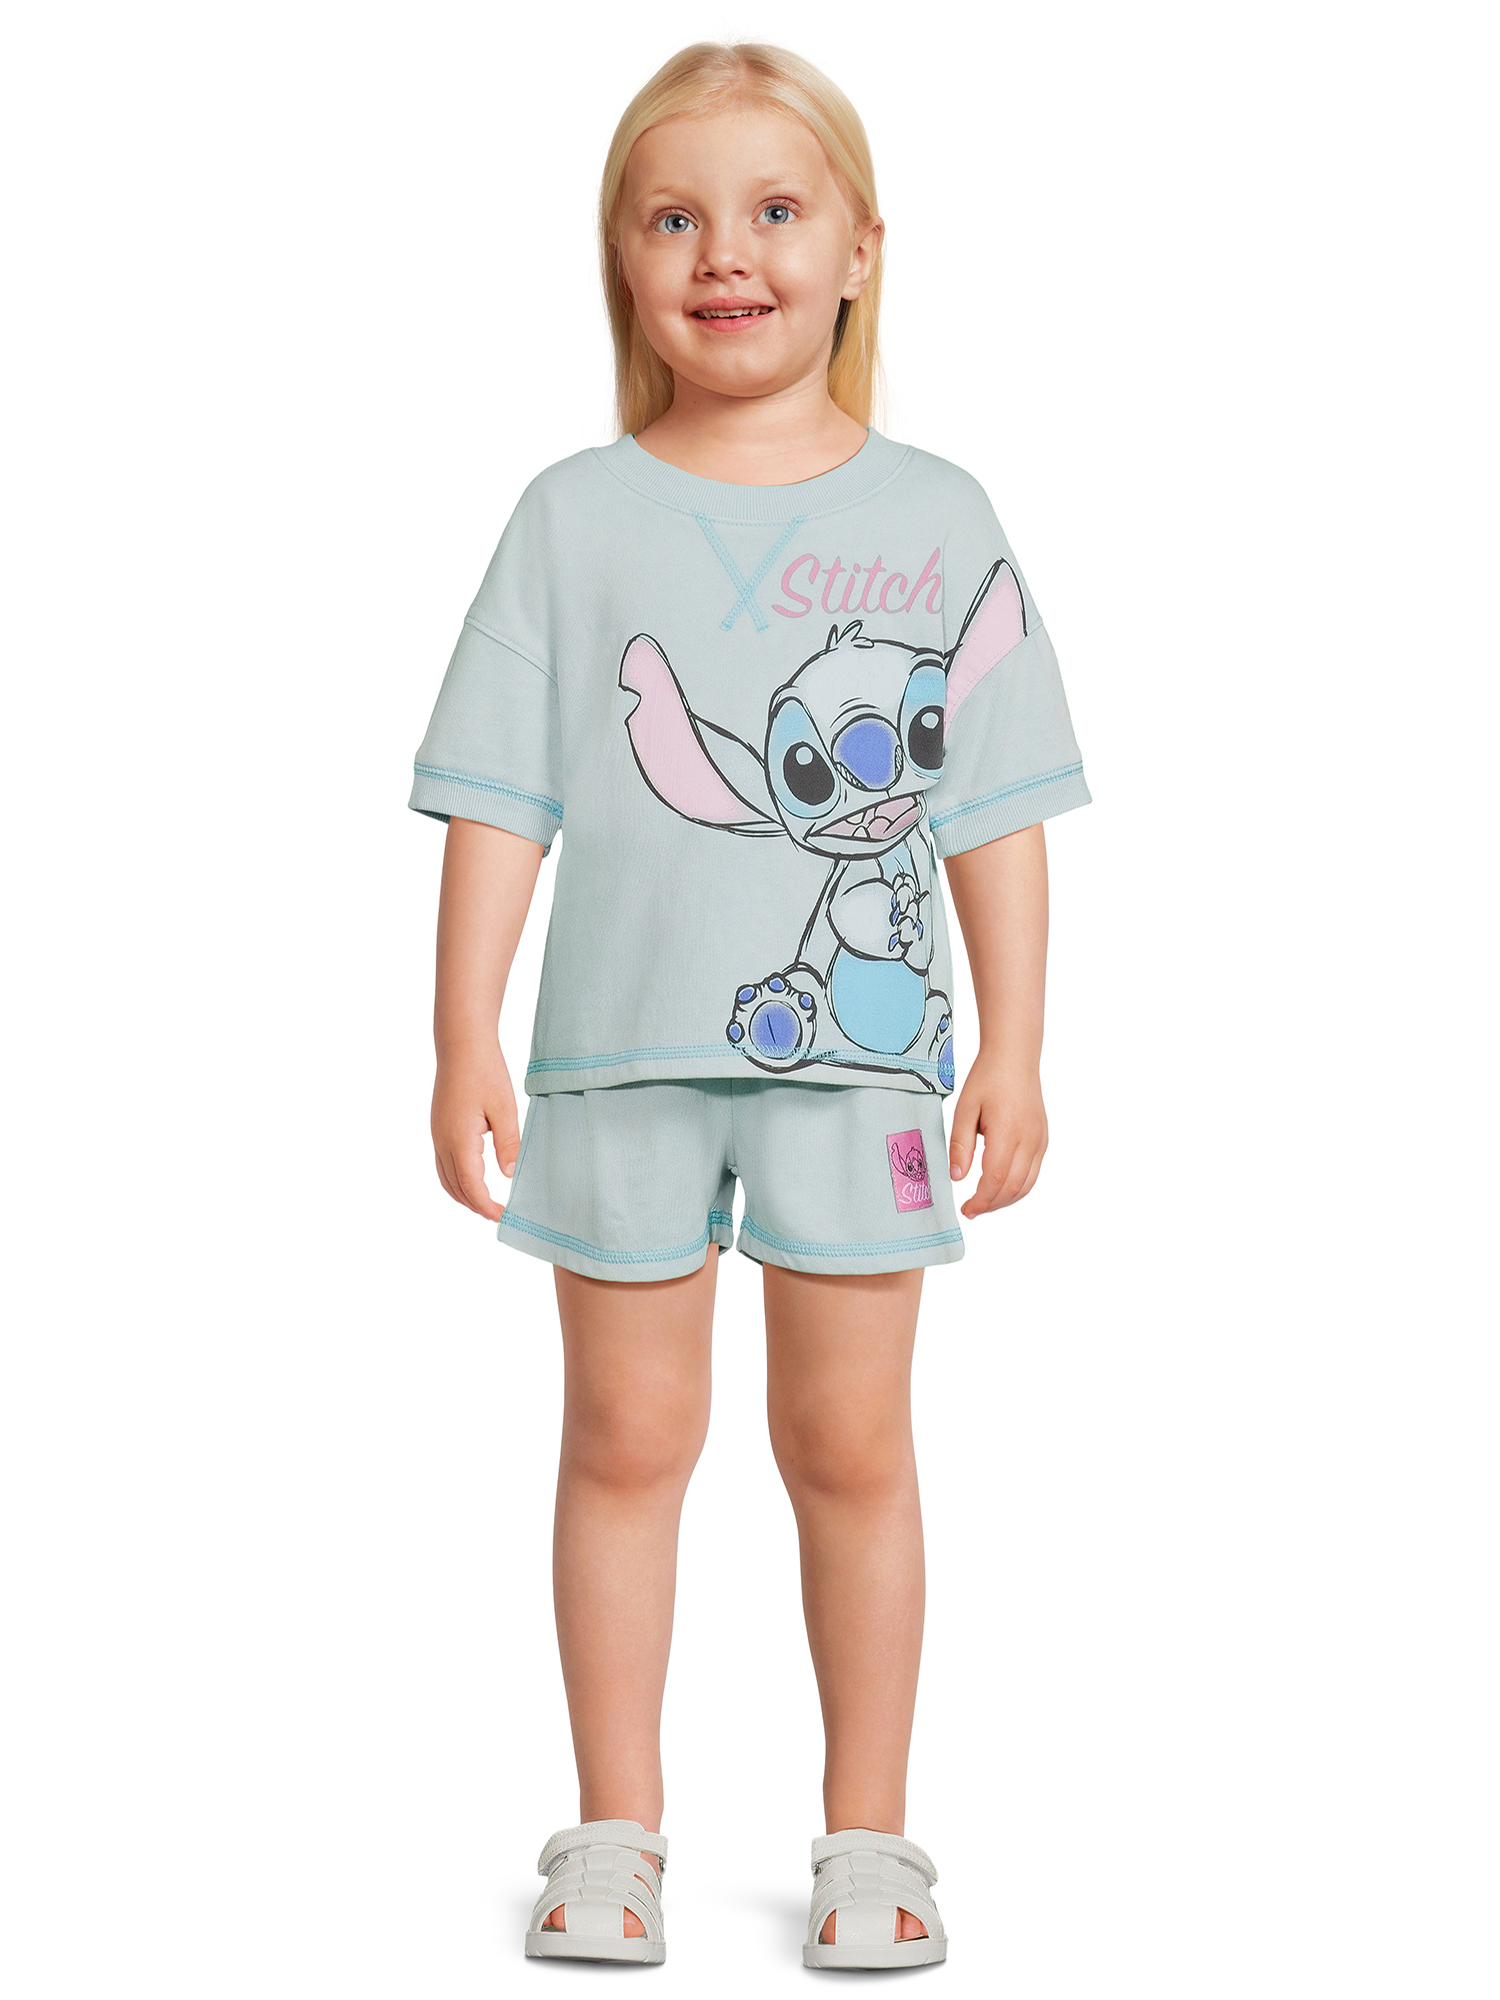 Lilo & Stitch Toddler Girls Tee and Shorts Set, 2-Piece, Sizes 12M-5T - image 2 of 10